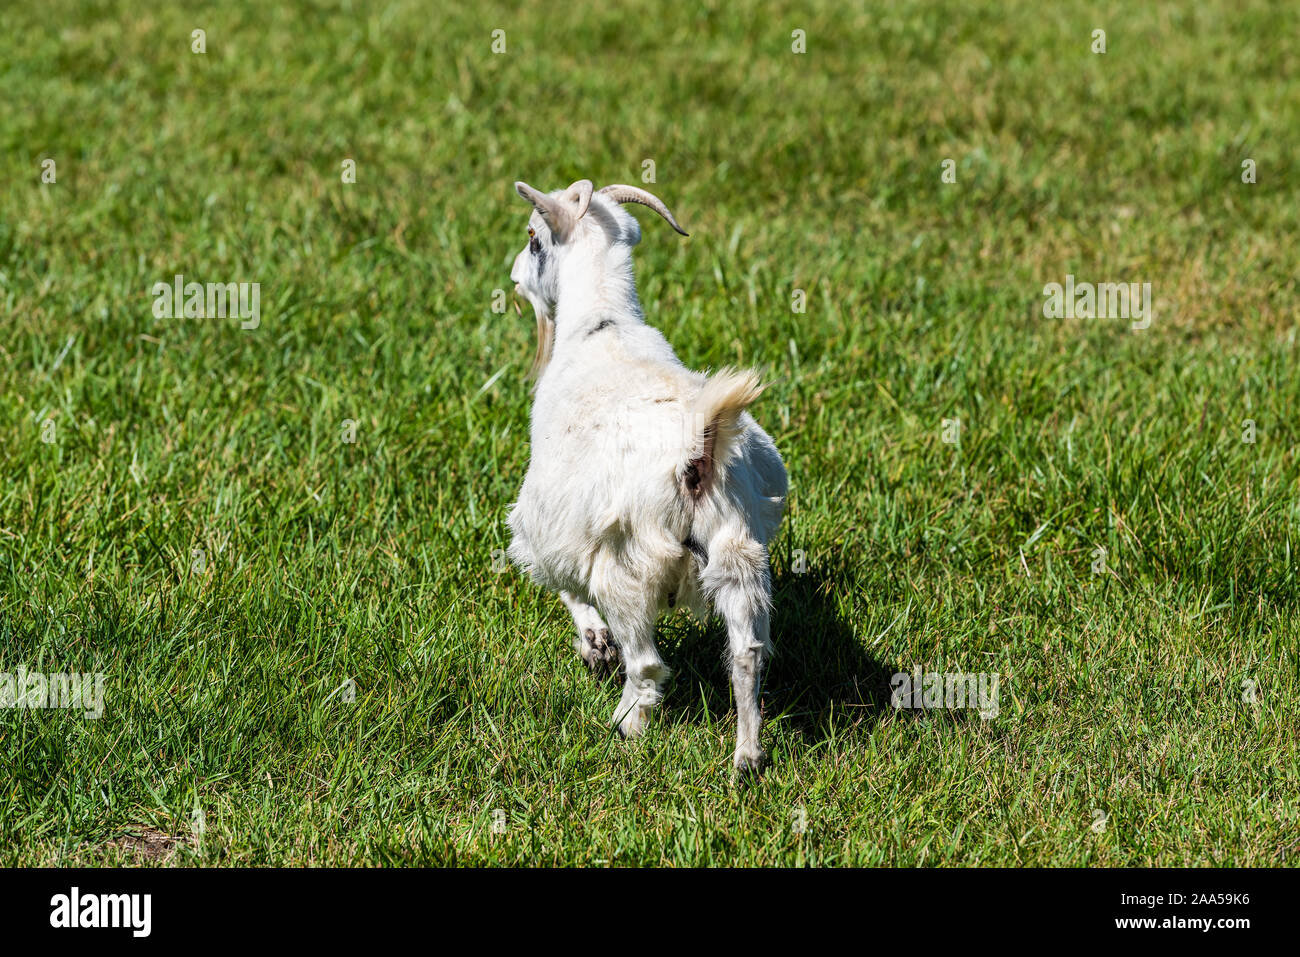 Small white goat running back on green grass in Montrose or Delta, Colorado summer cute adorable farm animal closeup Stock Photo